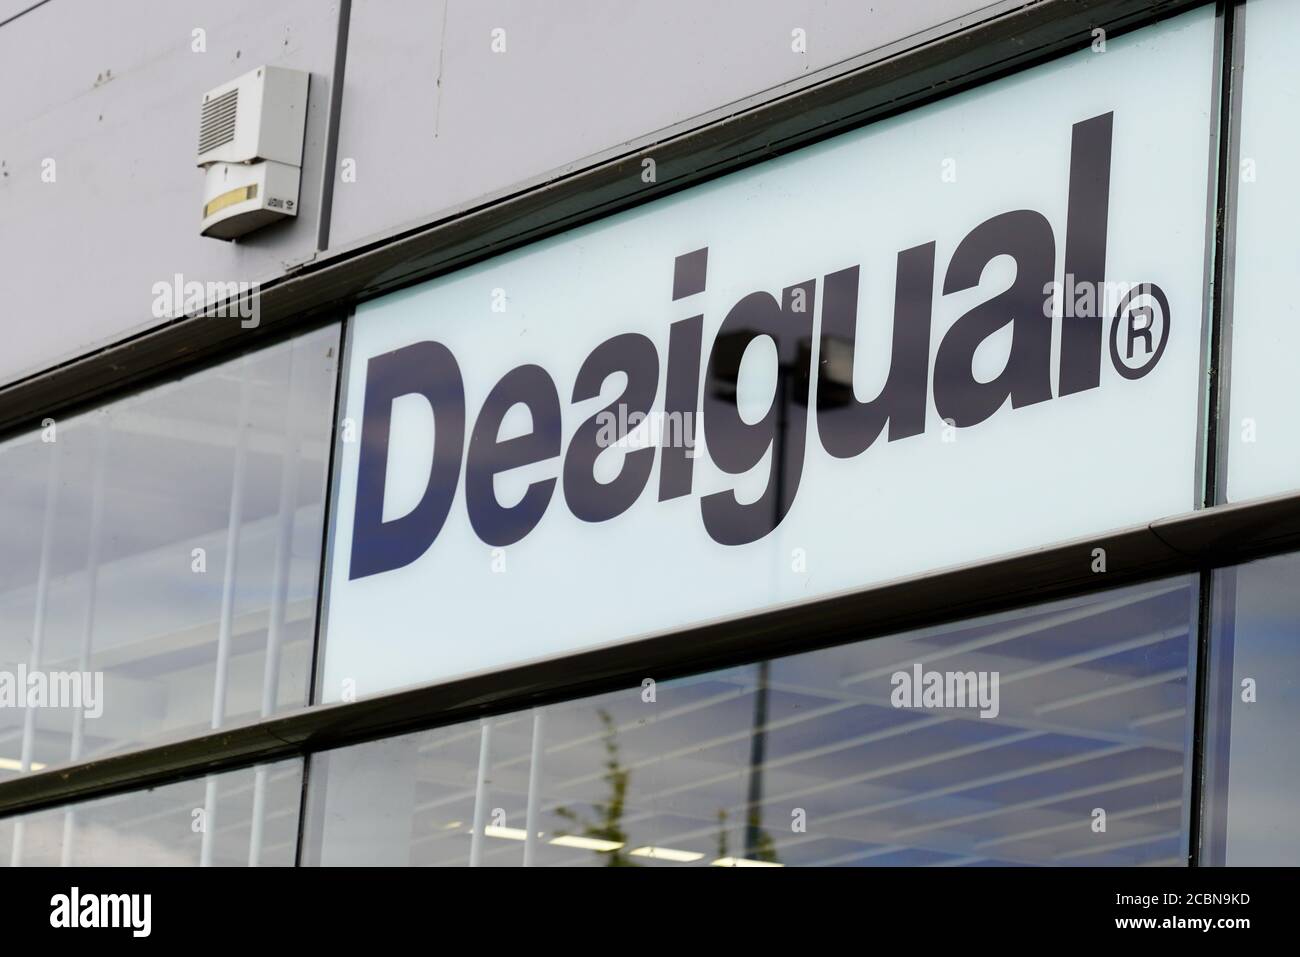 Bordeaux , Aquitaine / France - 08 10 2020 : desigual logo and text sign of  shop on spanish store clothing fashion facade Stock Photo - Alamy